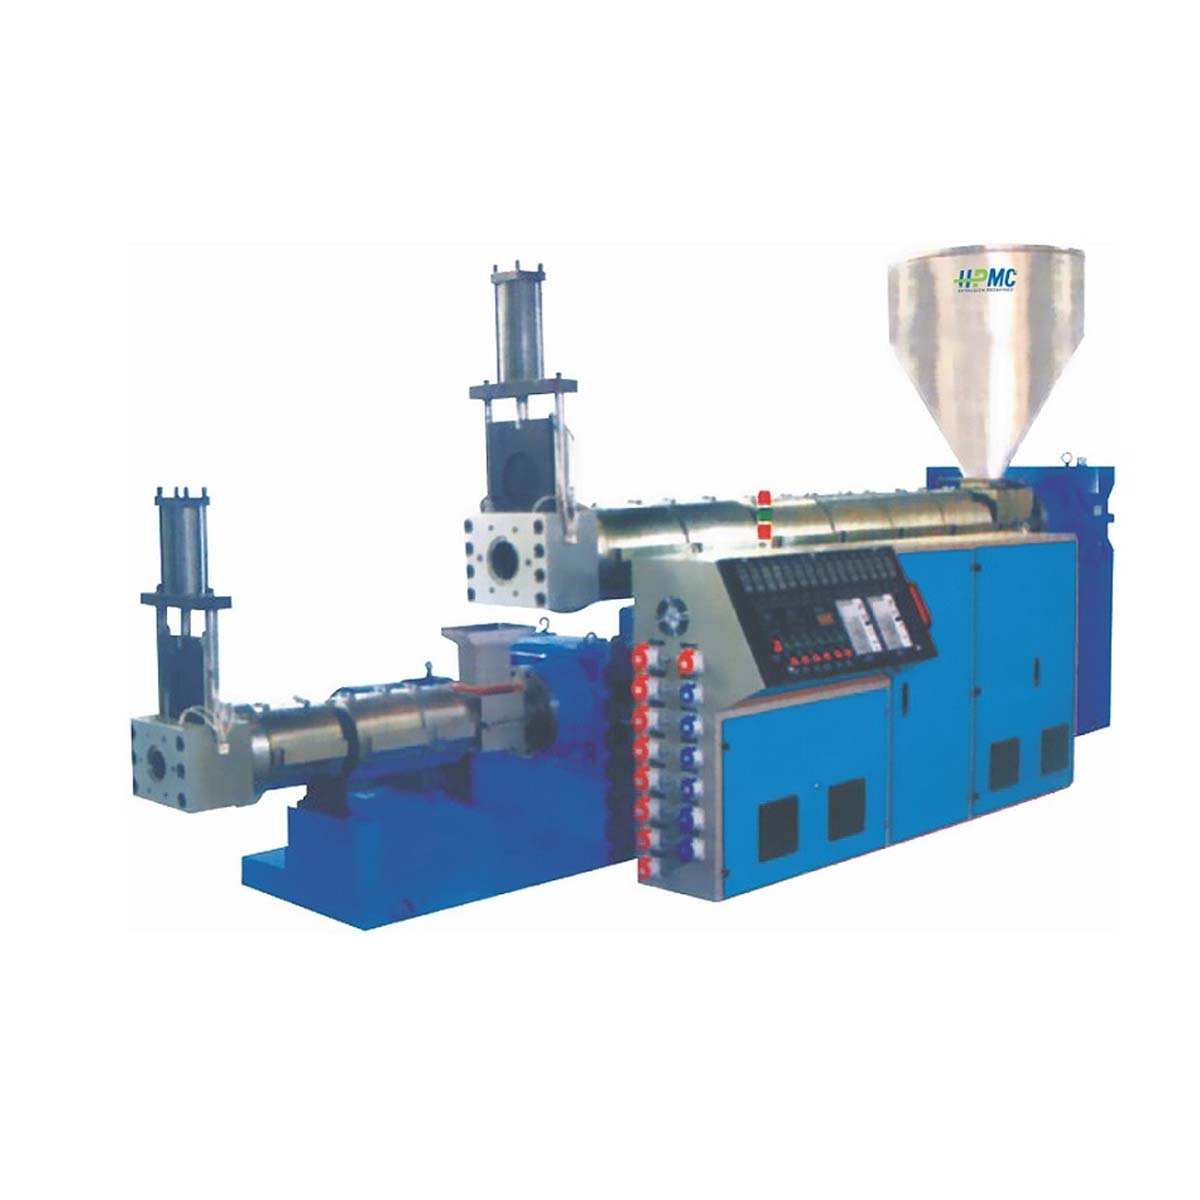 Plastic Recycling Machine Manufacturers, Suppliers and Exporters in Delhi